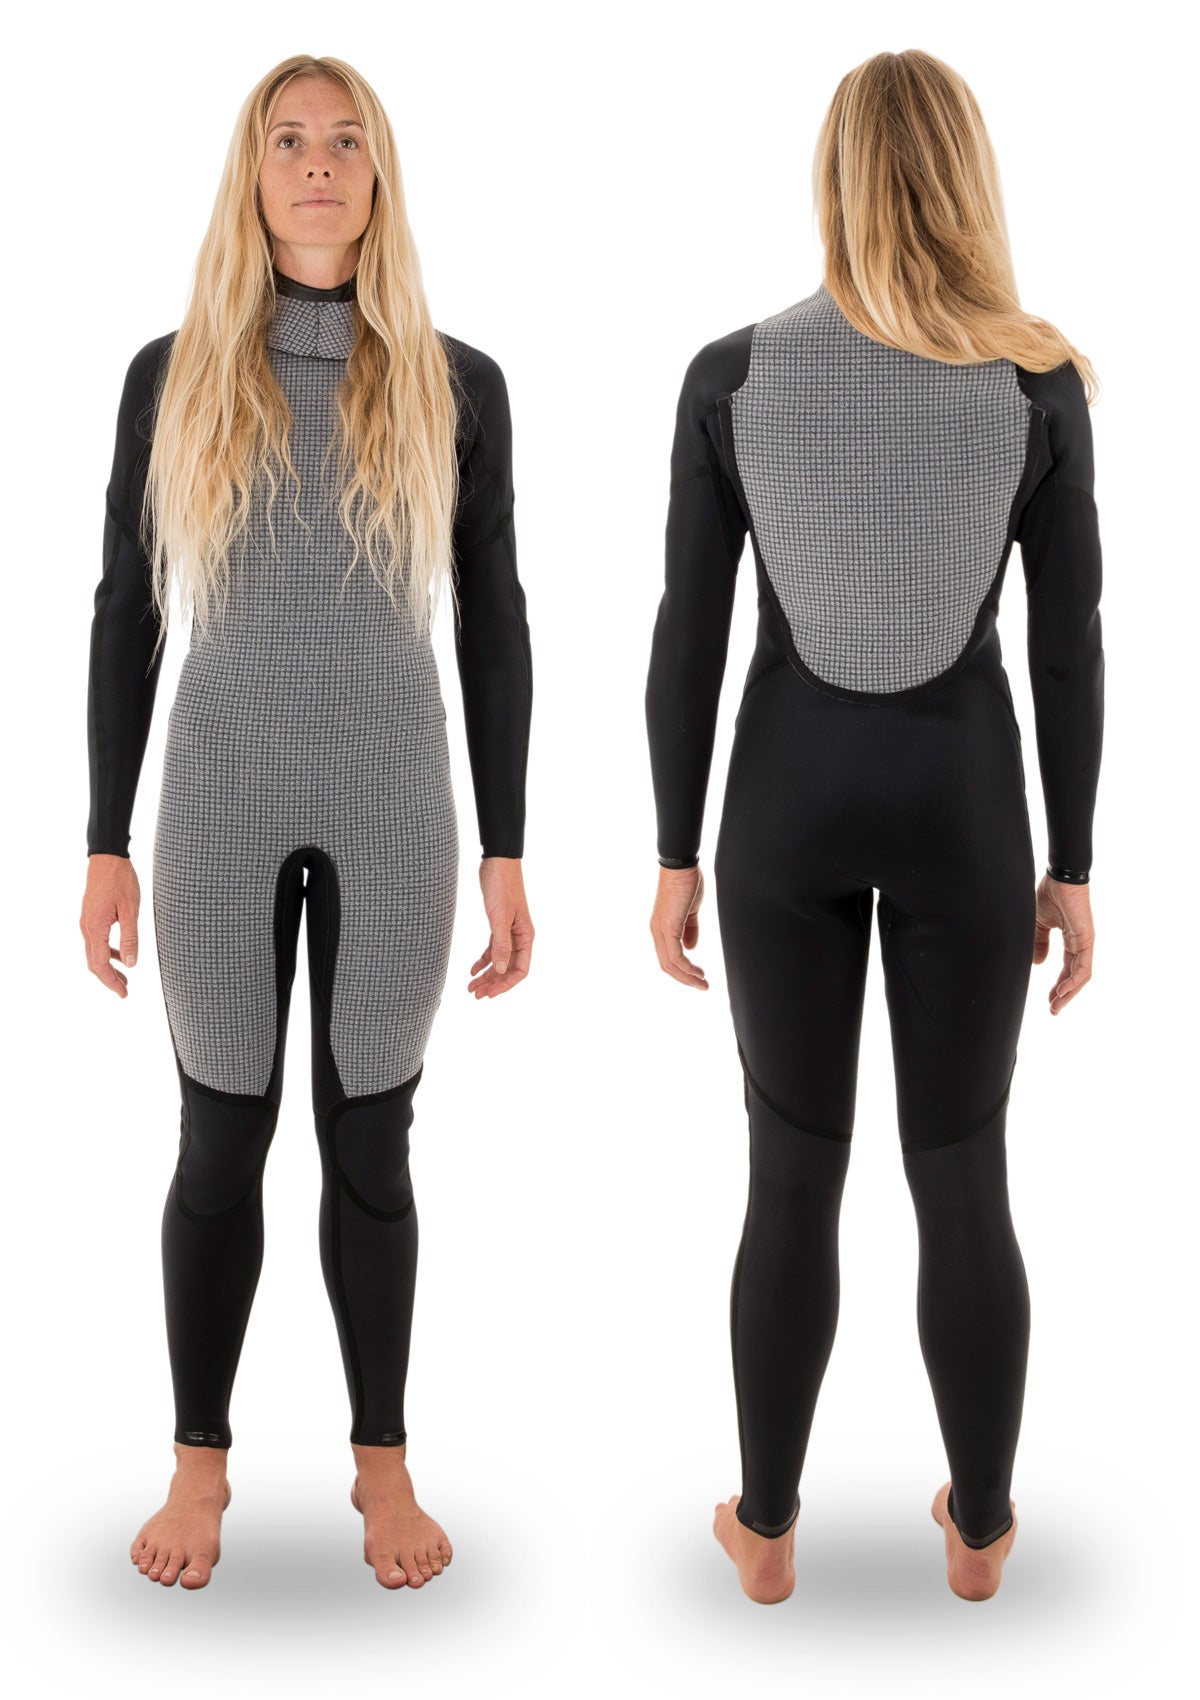 Womens 4/3 Thermal Back Zip Wetsuit